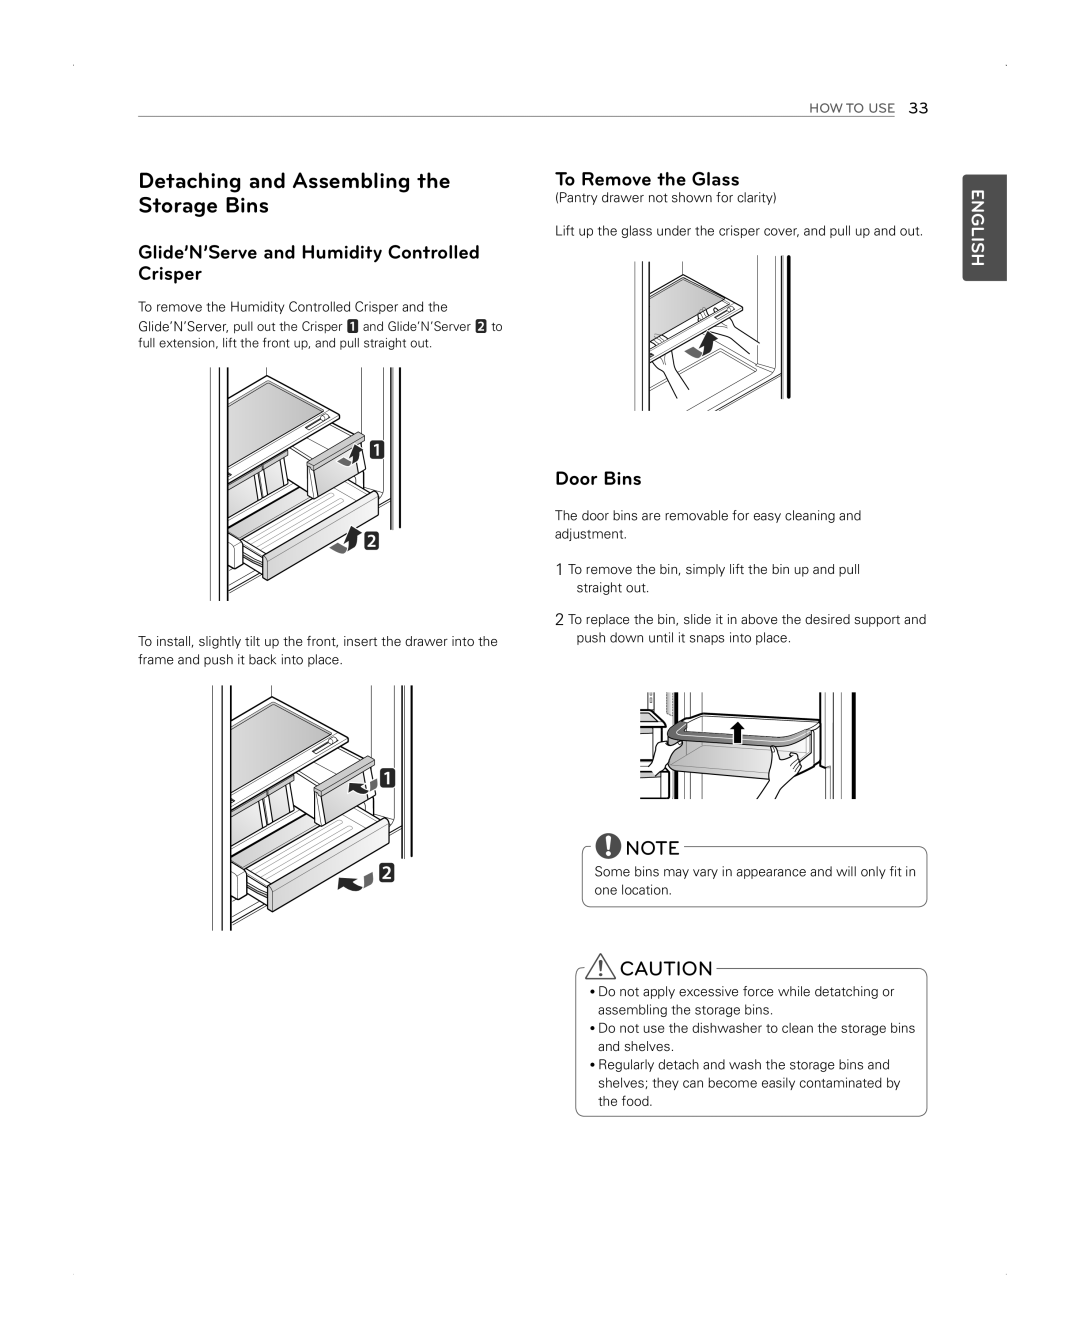 LG Electronics LFX31945ST Detaching and Assembling the, Storage Bins, To Remove the Glass, Door Bins, How To Use 